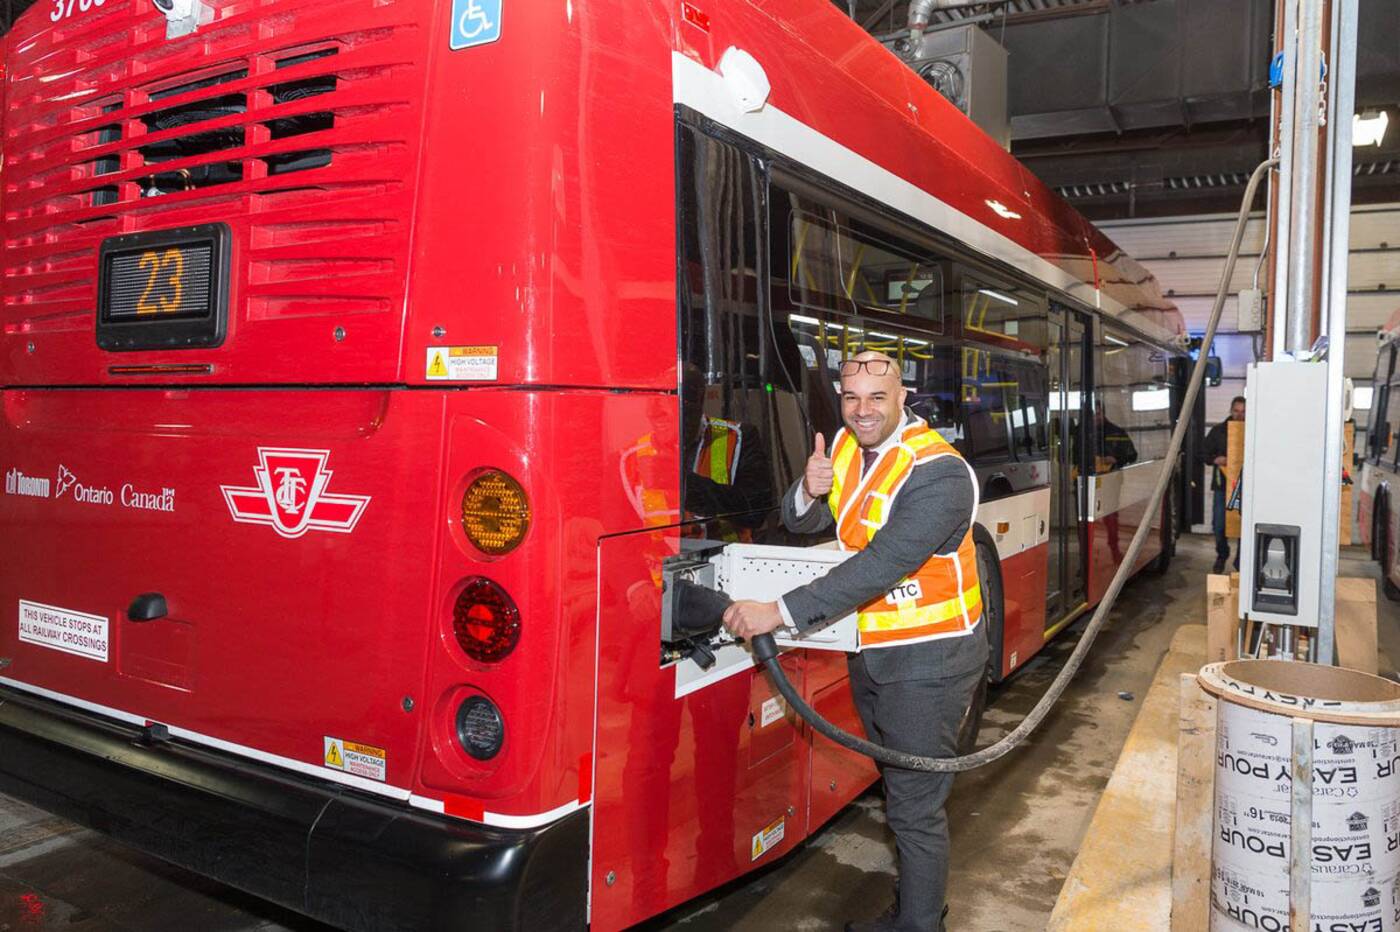 TTC unveils Toronto's first new electric bus